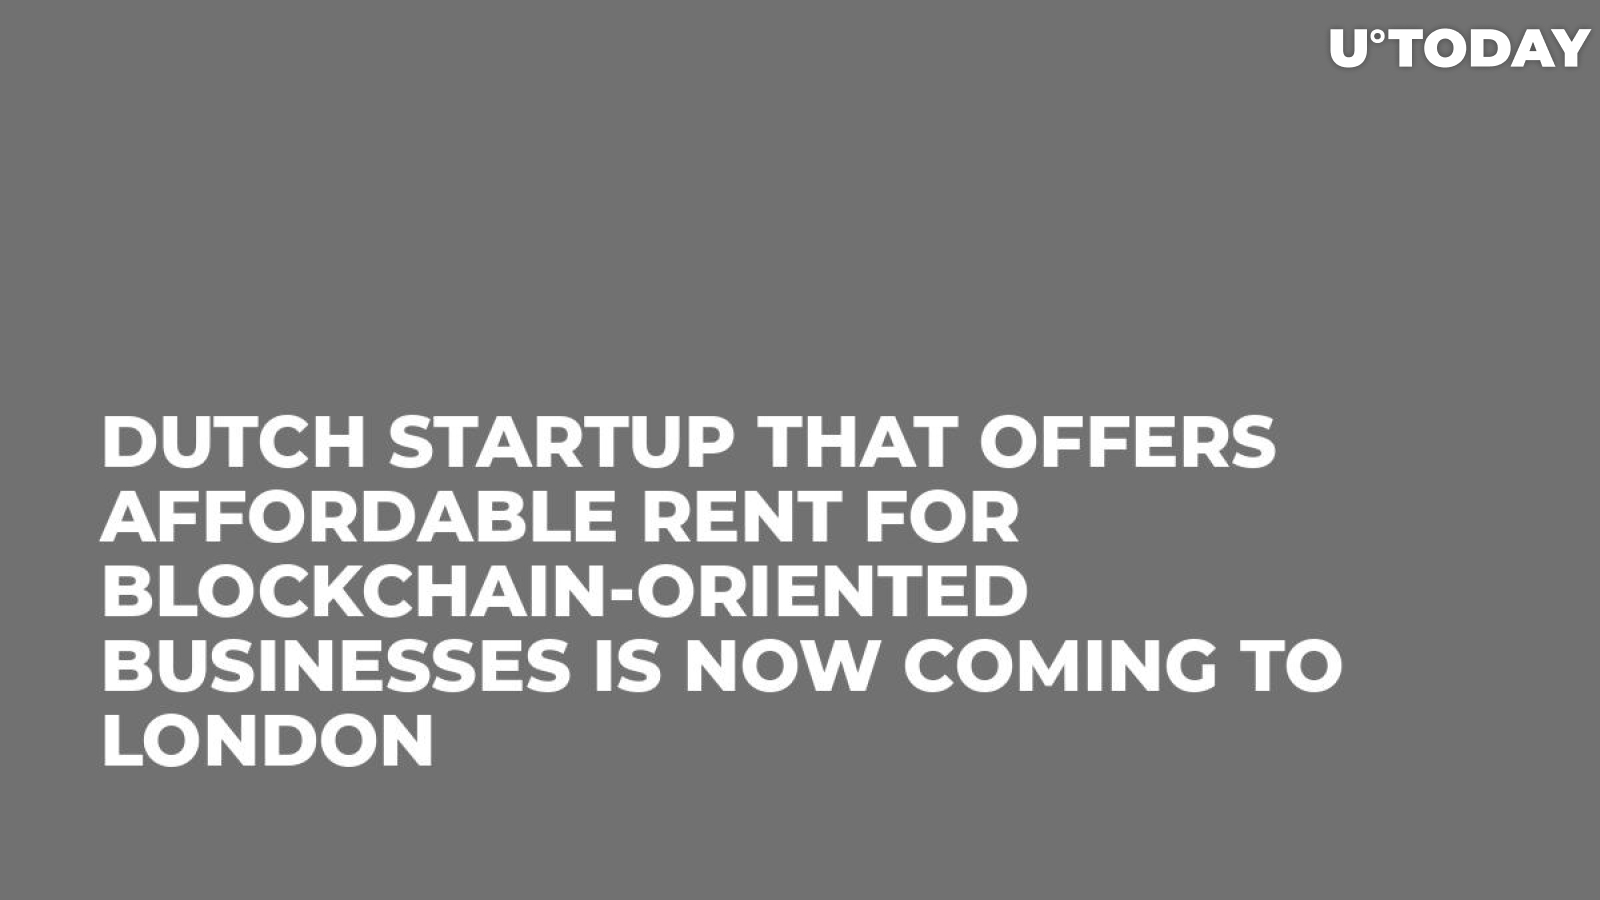 Dutch Startup That Offers Affordable Rent For Blockchain-Oriented Businesses Is Now Coming to London